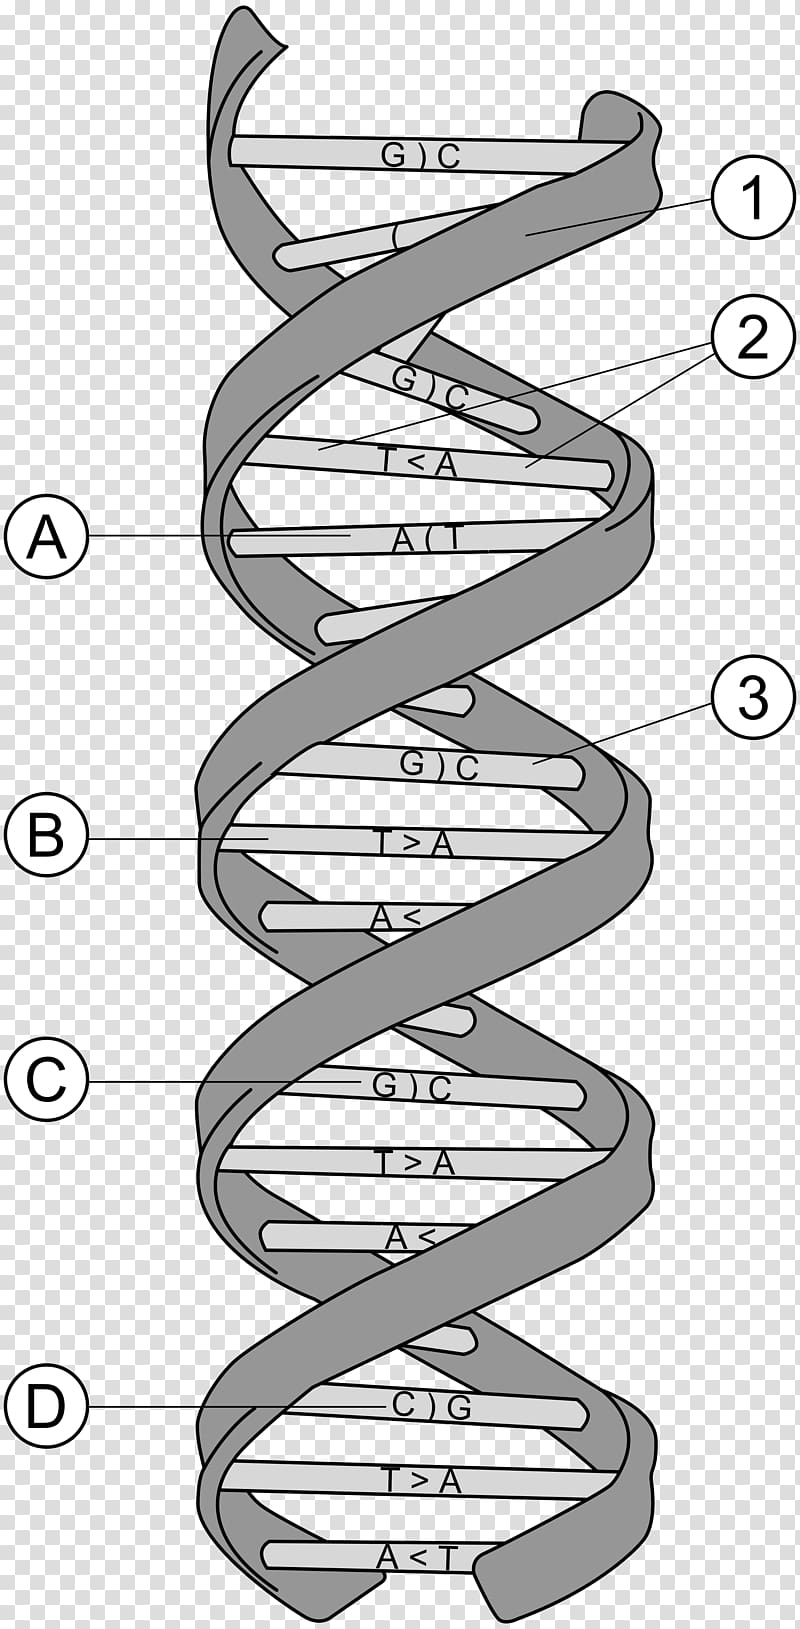 Nucleic acid structure DNA Molecular Structure of Nucleic Acids: A Structure for Deoxyribose Nucleic Acid Adenine Nucleobase, DNA transparent background PNG clipart